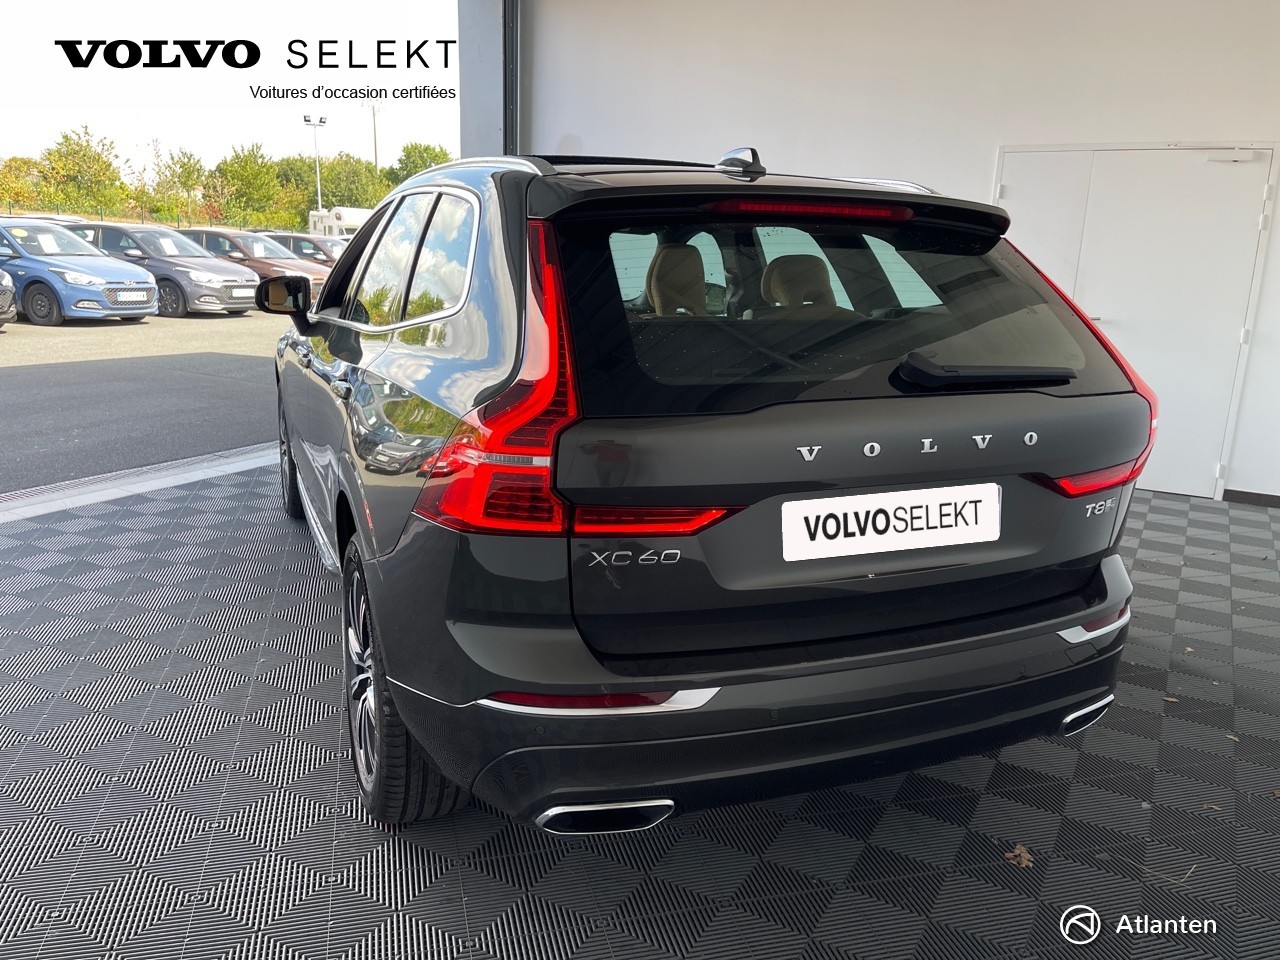 VOLVO XC60 XC60 T8 Twin Engine 303 ch + 87 ch Geartronic 8 - Véhicule Occasion Océane Auto